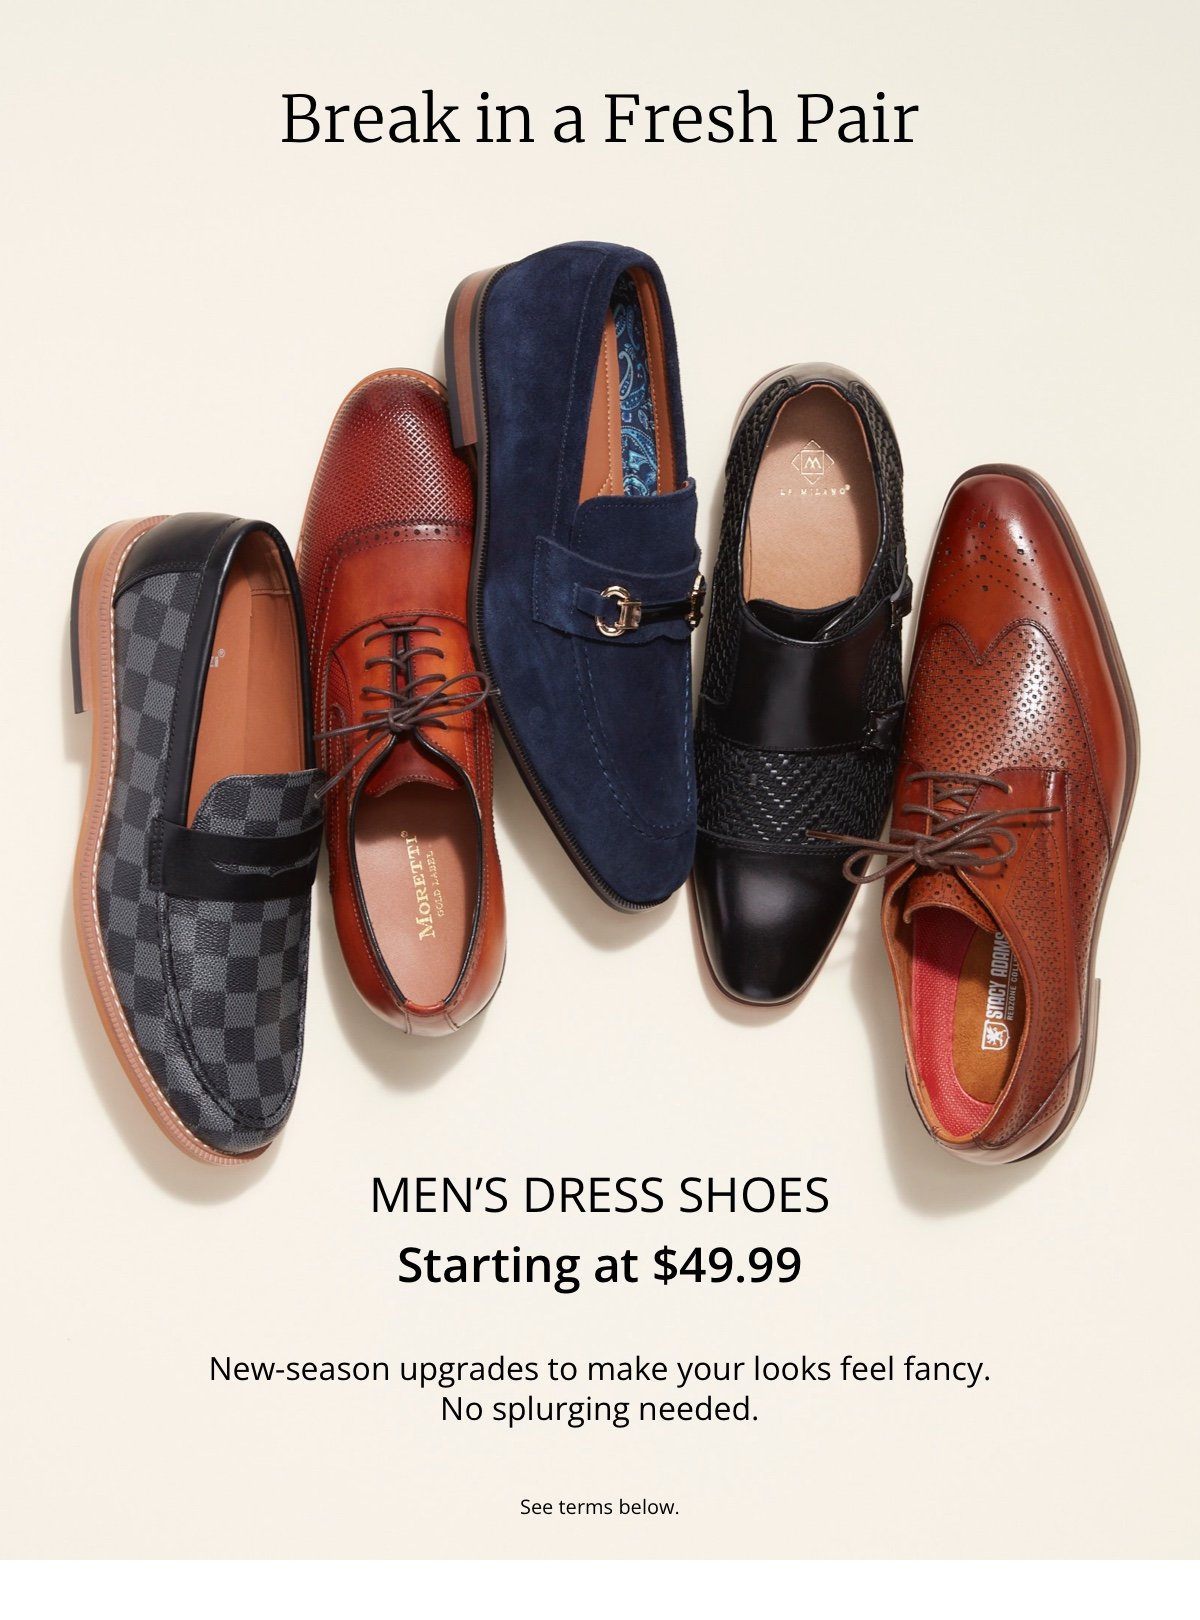 Break in a Fresh Pair |Men’s Dress Shoes|Starting at \\$49.99|New-season upgrades to make your looks feel fancy. No splurging needed.|See terms below.